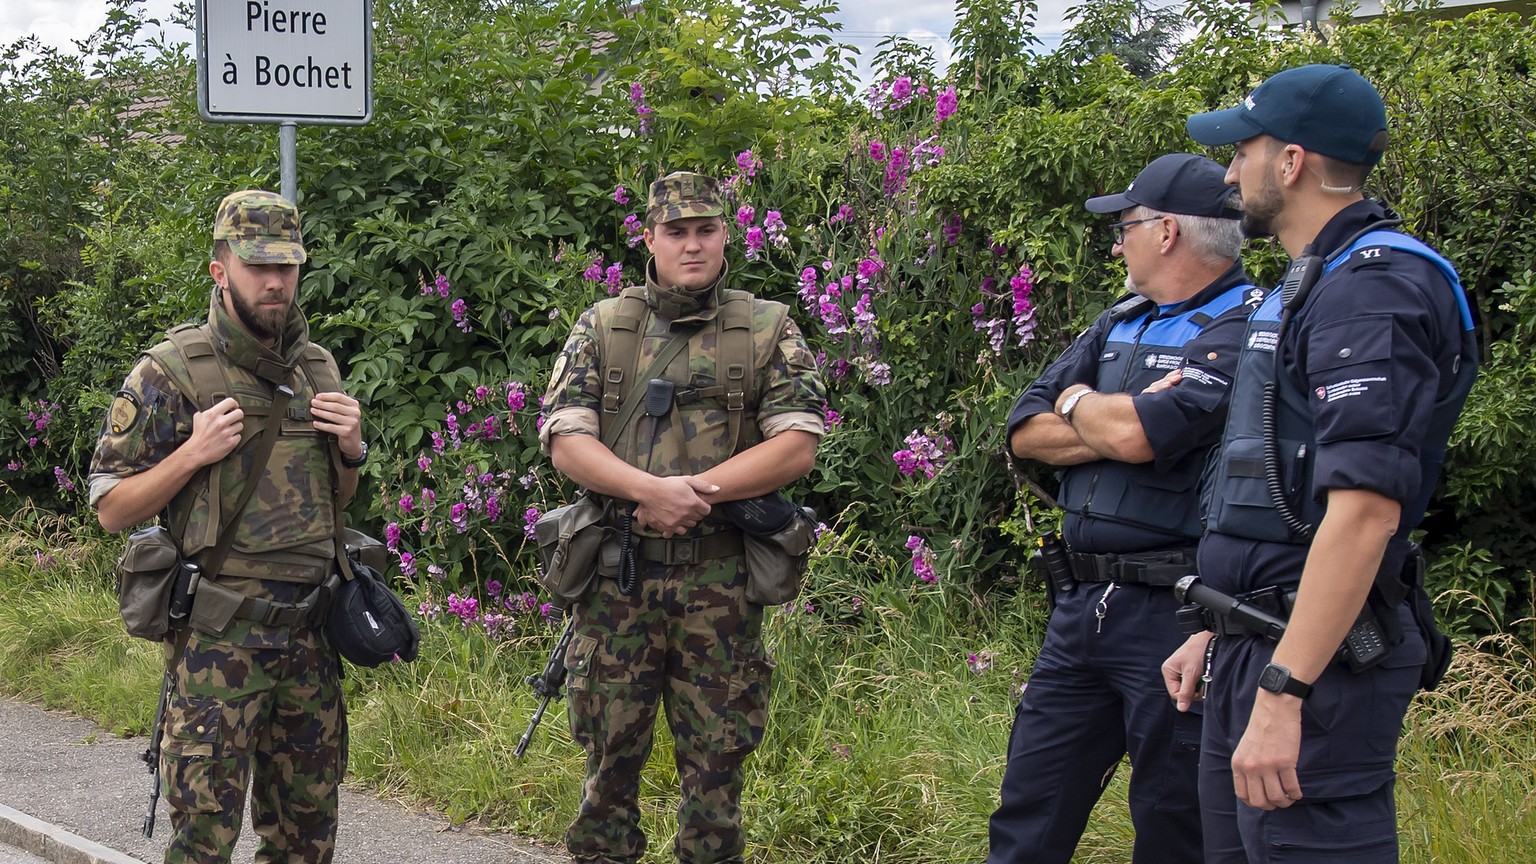 Swiss border guards and soldiers await the concrete blocks that closed customs access, in Thonex near Geneva, Switzerland, on Sunday, June 14, 2020. Concrete blocks closed the road at the Swiss-French ...